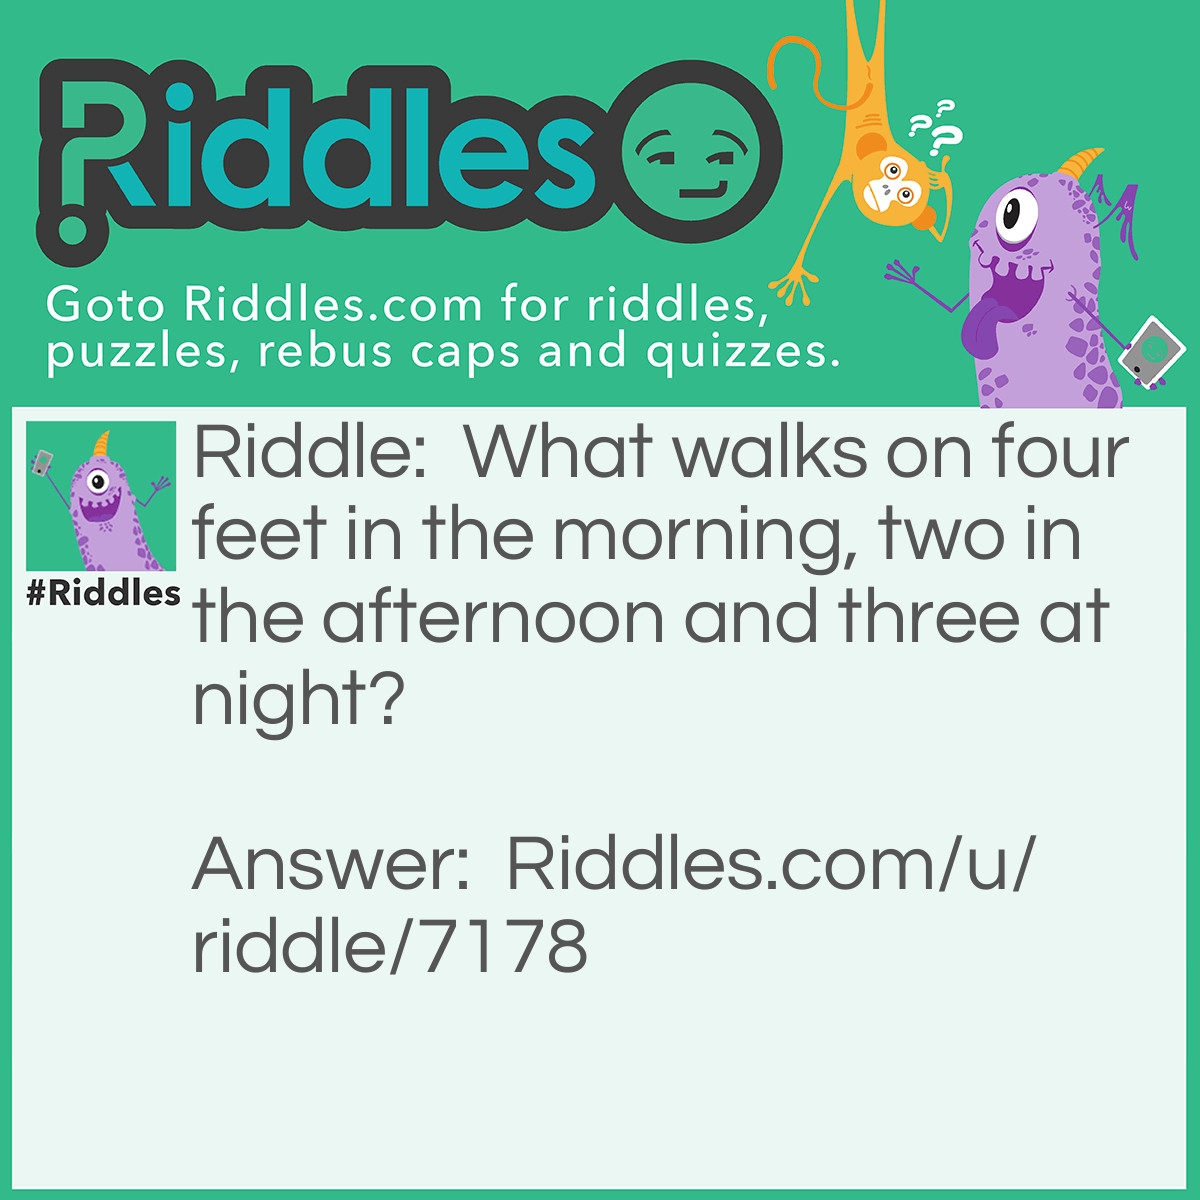 Riddle: What walks on four feet in the morning, two in the afternoon and three at night? Answer: Man: as an infant, he crawls on all fours; as an adult, he walks on two legs and; in old age, he uses a 'walking' stick.